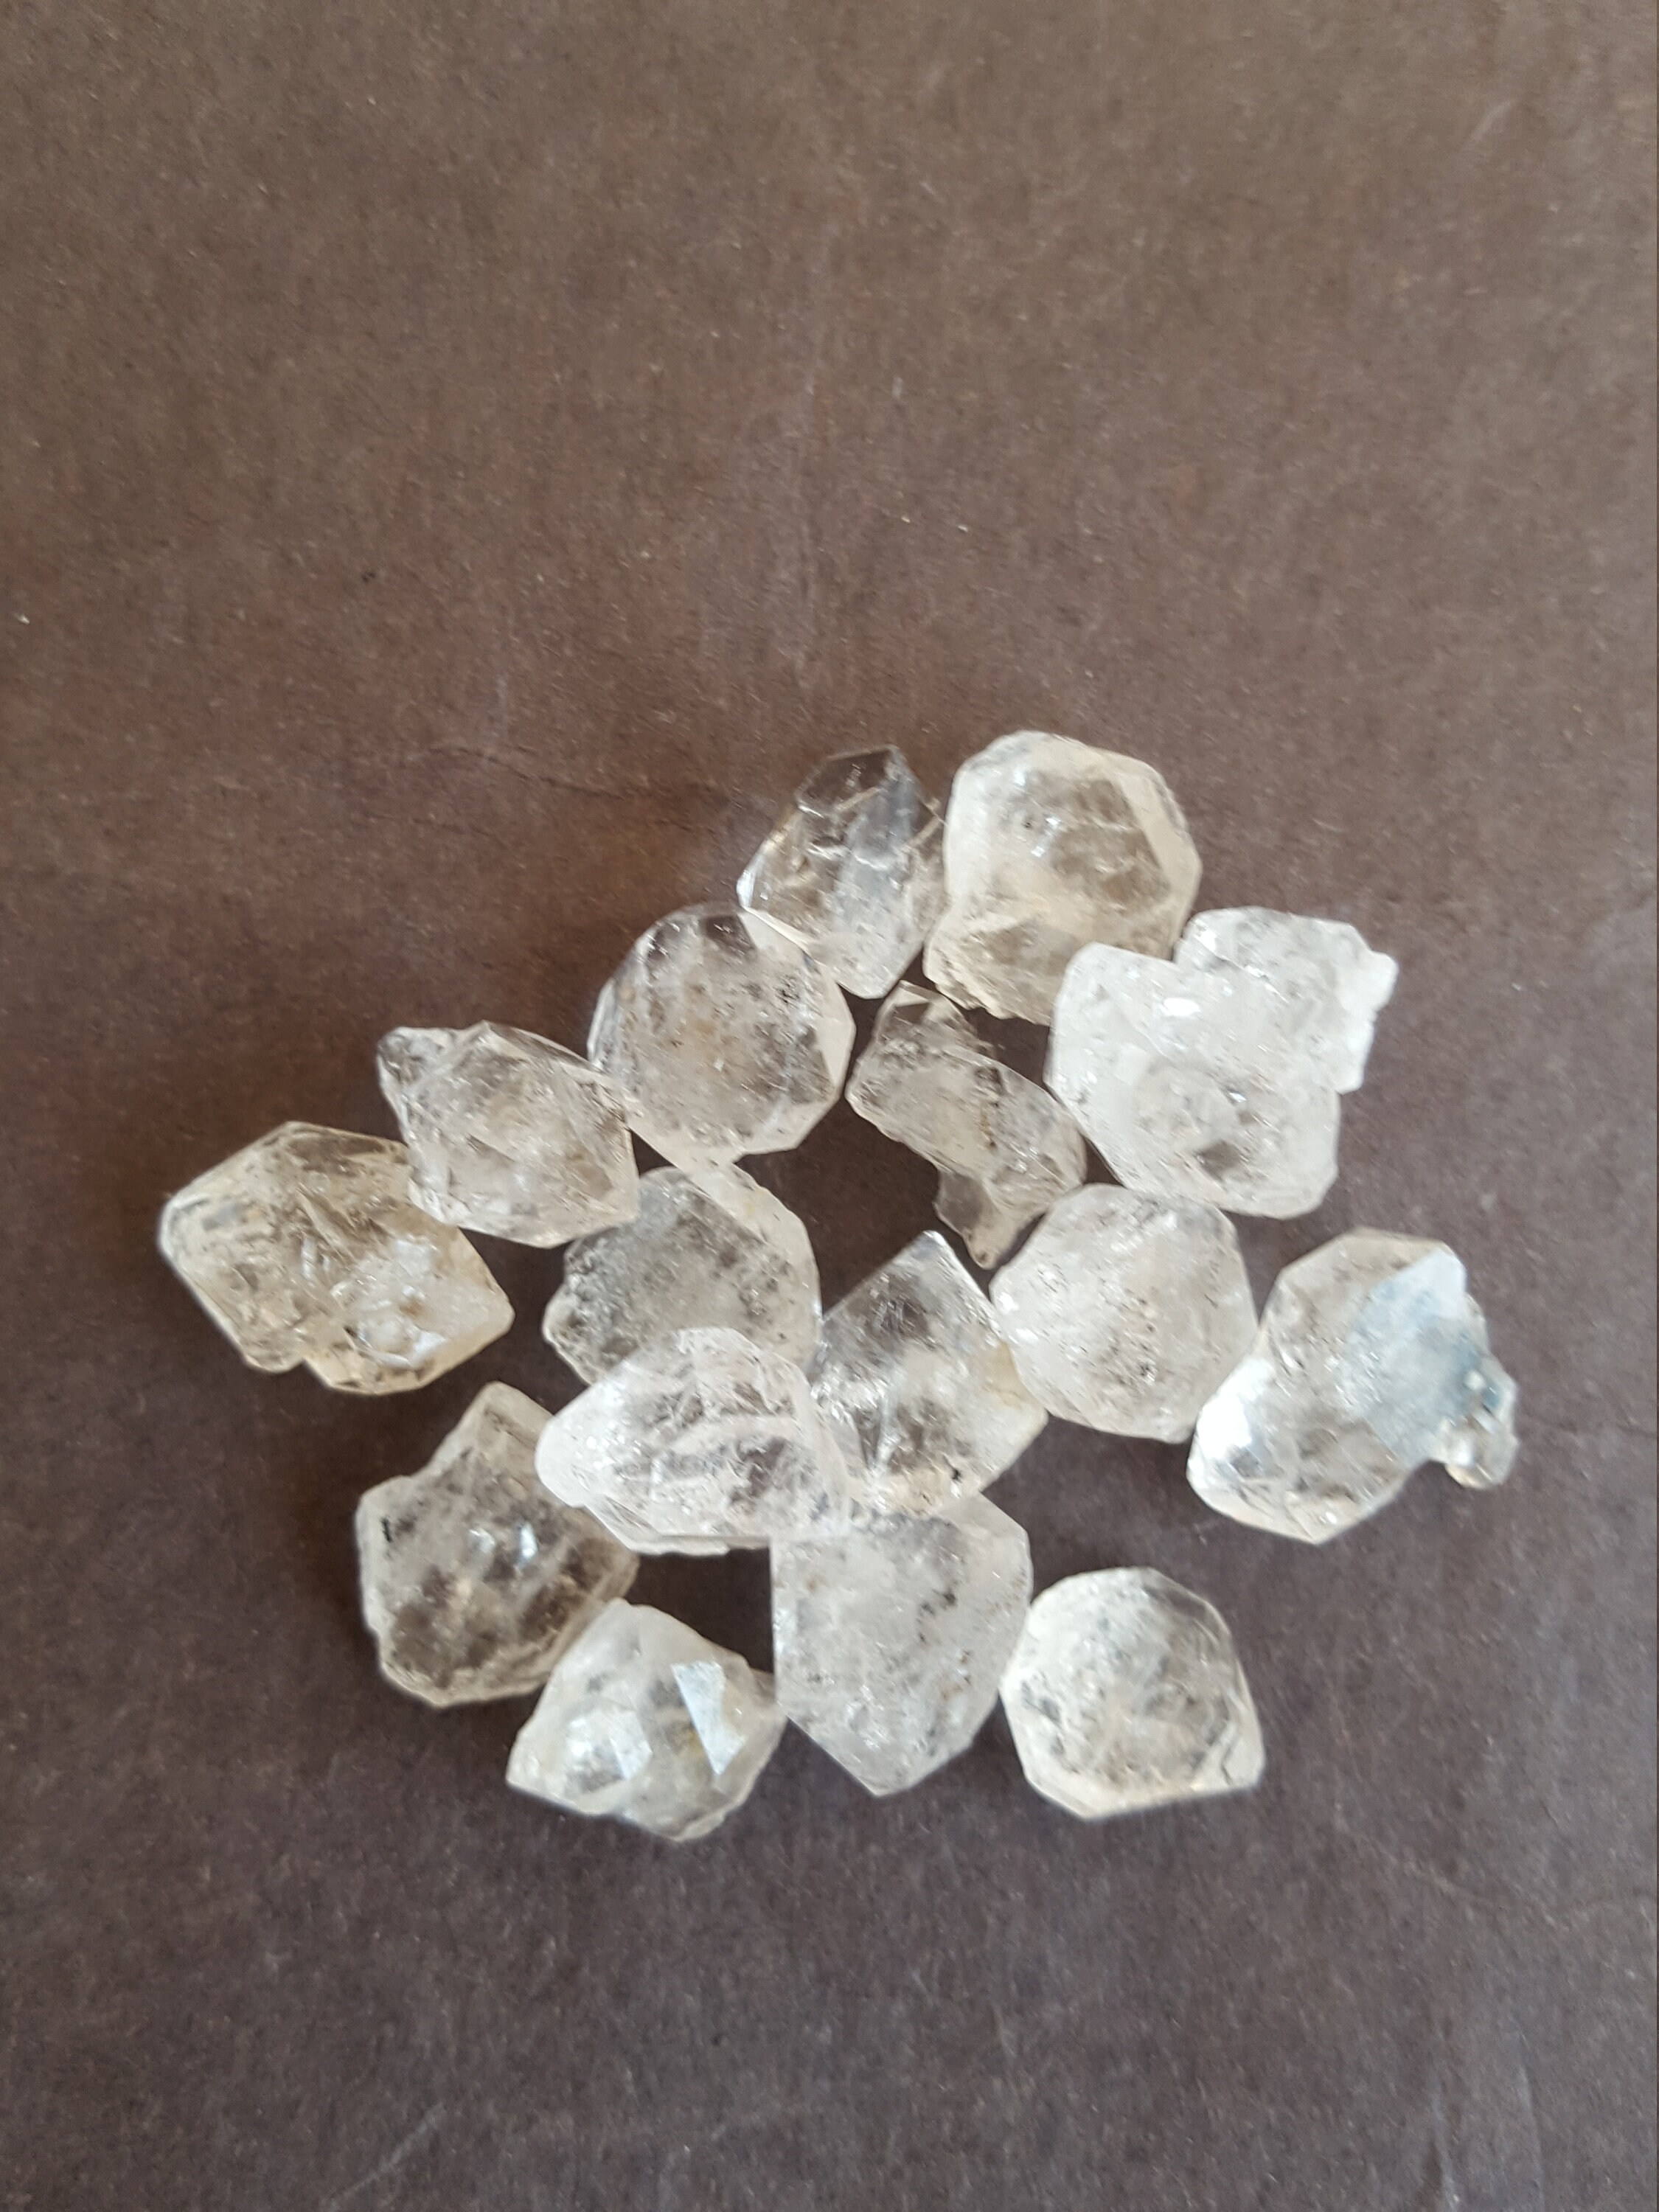 Newly Listed ~~~ White Herkimer Diamond Nuggets ~~~ Clear Quartz Nuggets ~~~ 25-35 MM ~~~ 2 Pieces ~~~ 150 carat ~~~ AA Quality ~~~